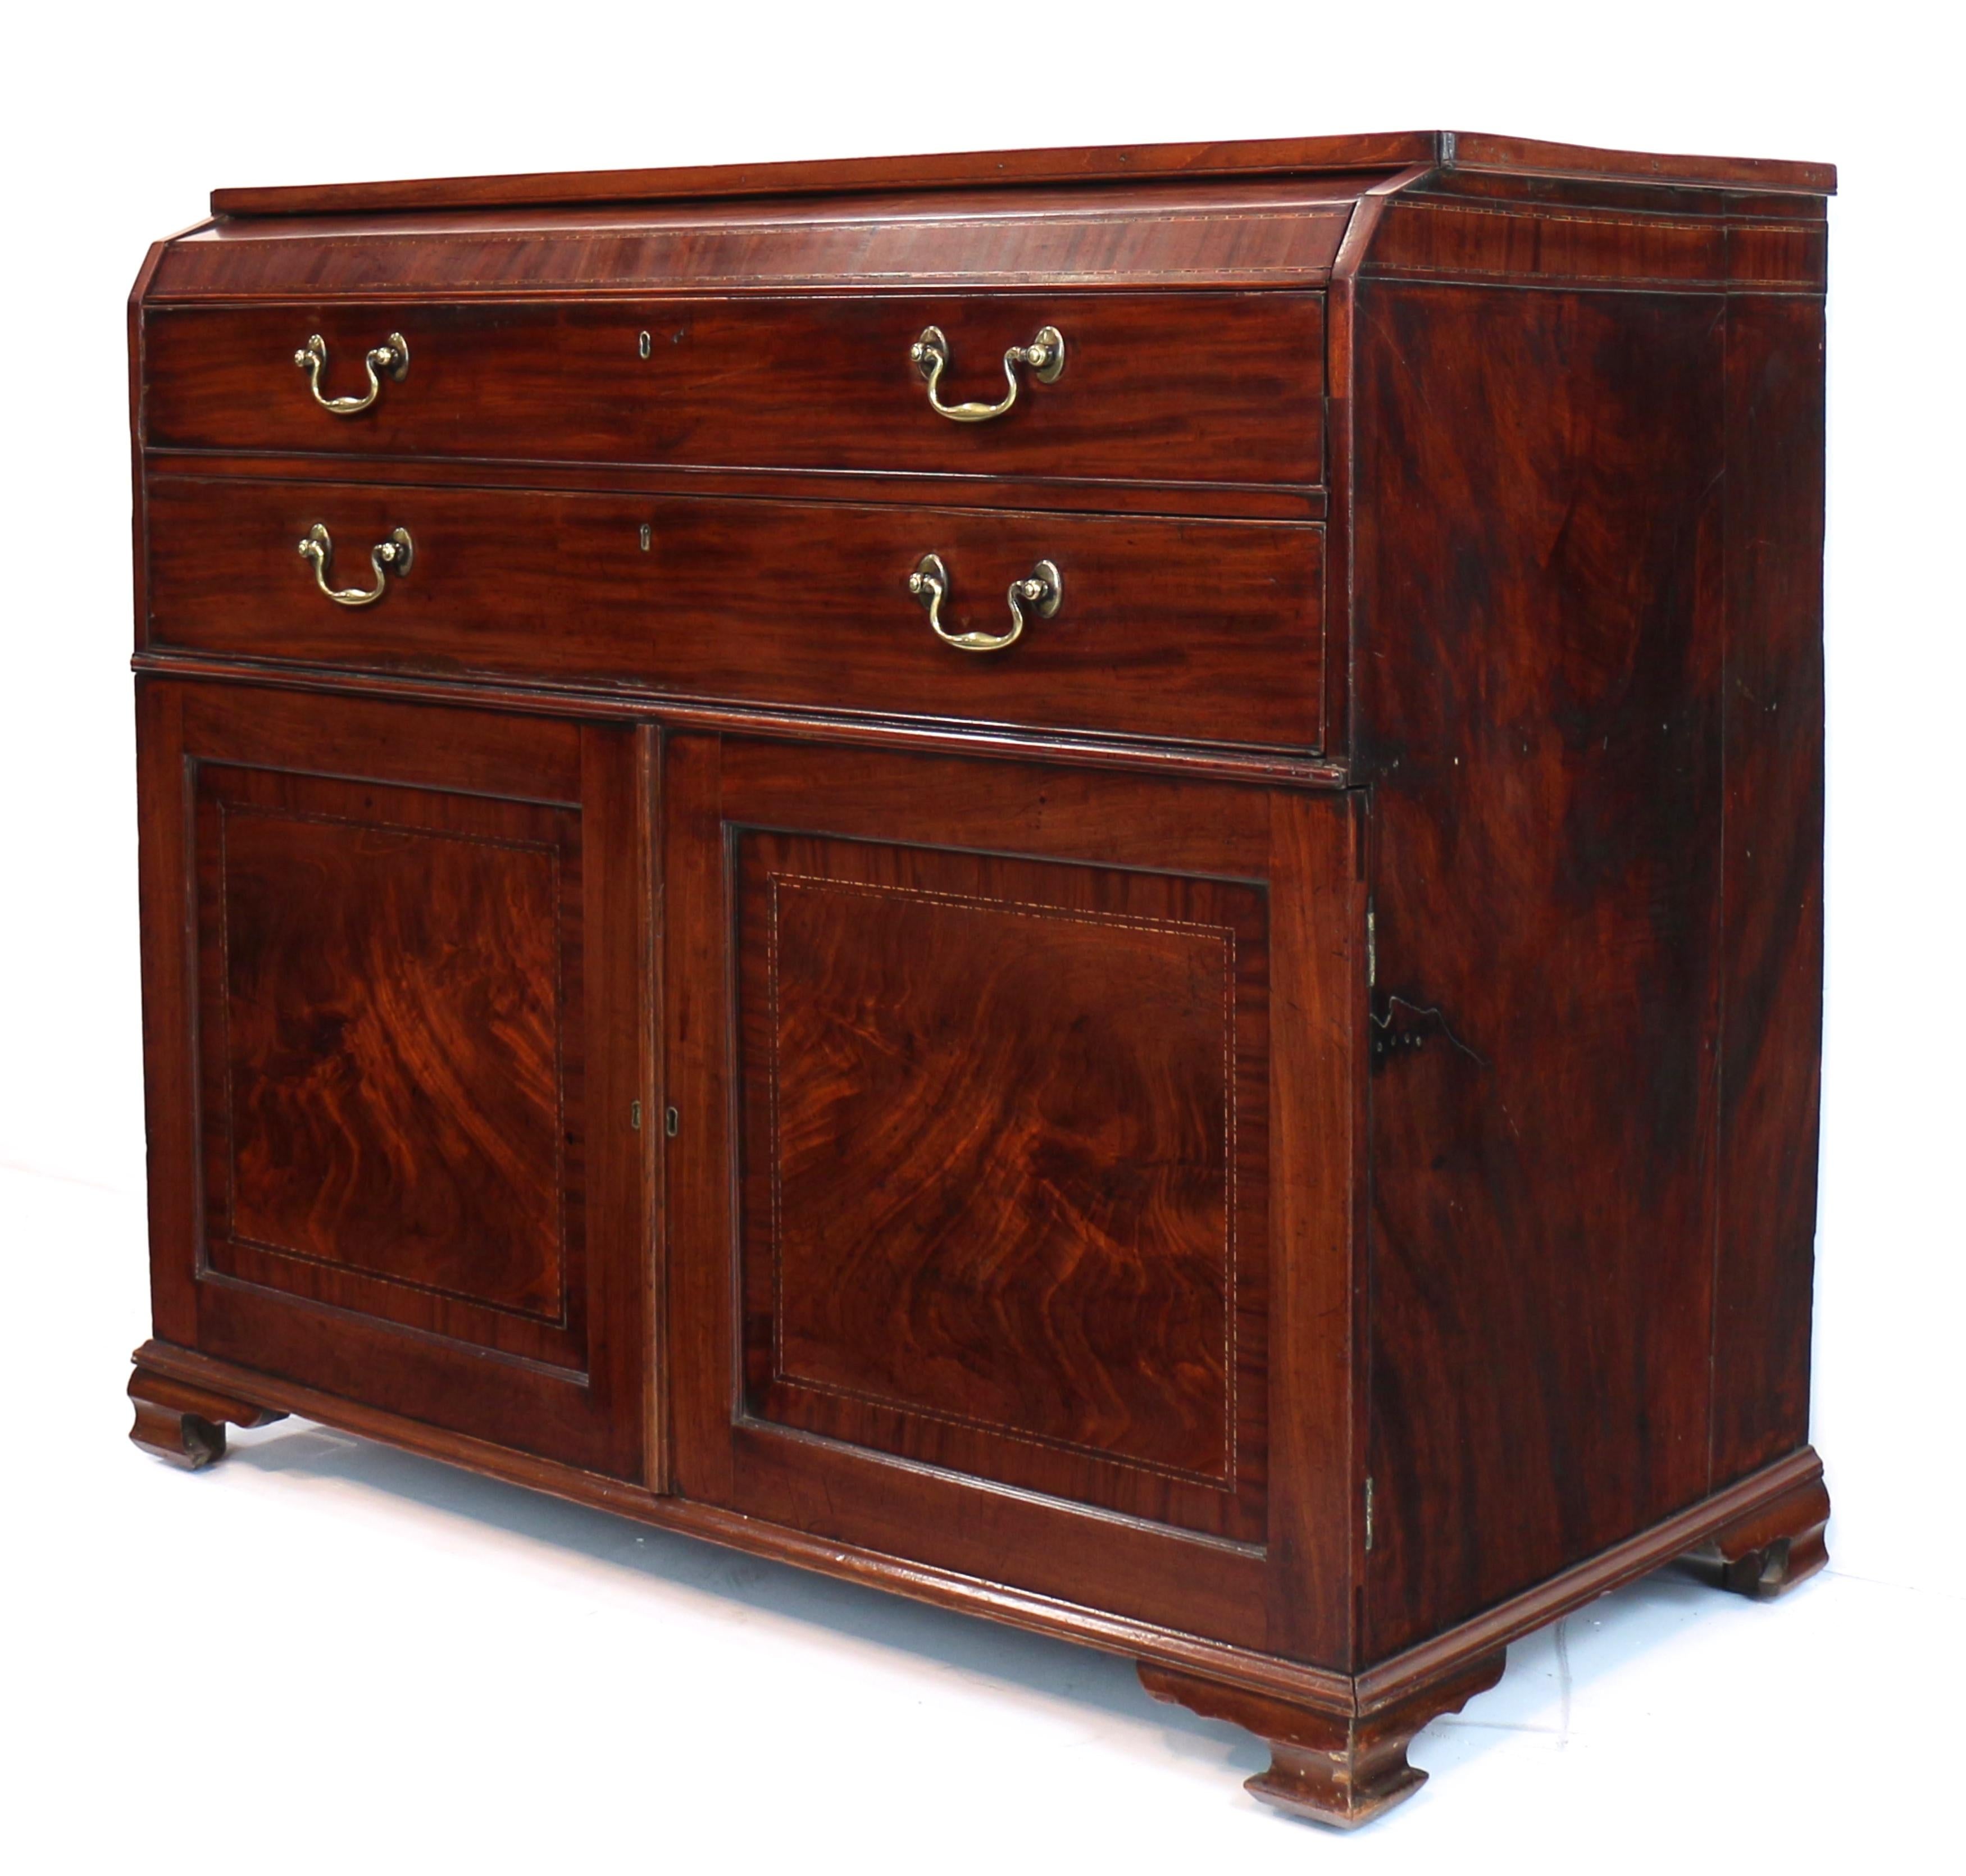 circa 1790.  With a rectangular top over a concealed long drawer with sloping front, mahogany crossbanding and parquetry and box stringing which continues across the top of the sides, the two long false drawer fronts below forming a deep secretaire